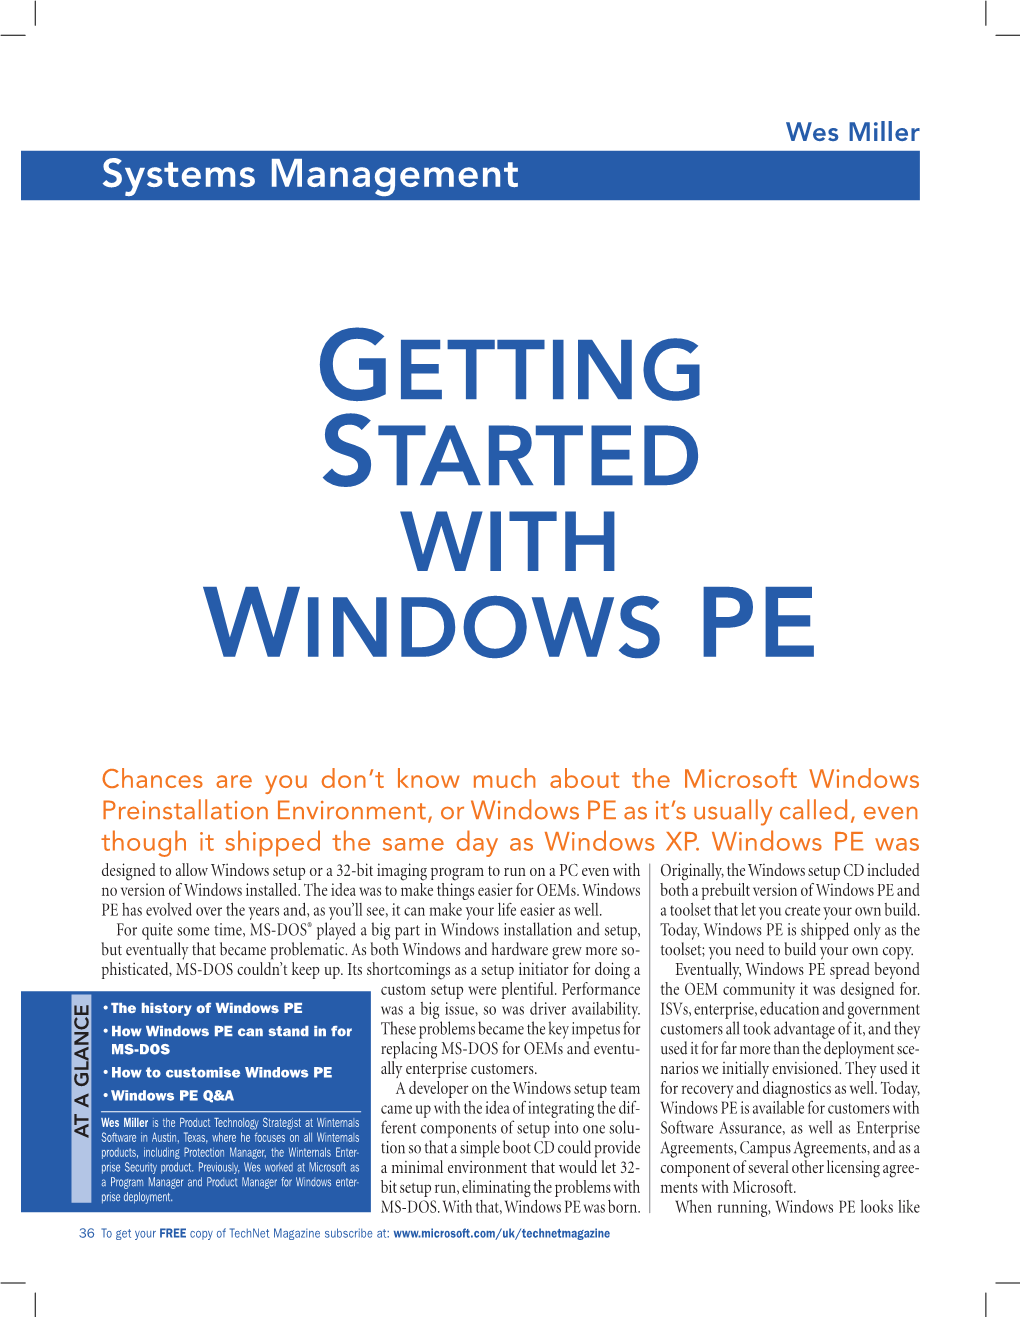 Getting Started with Windows PE